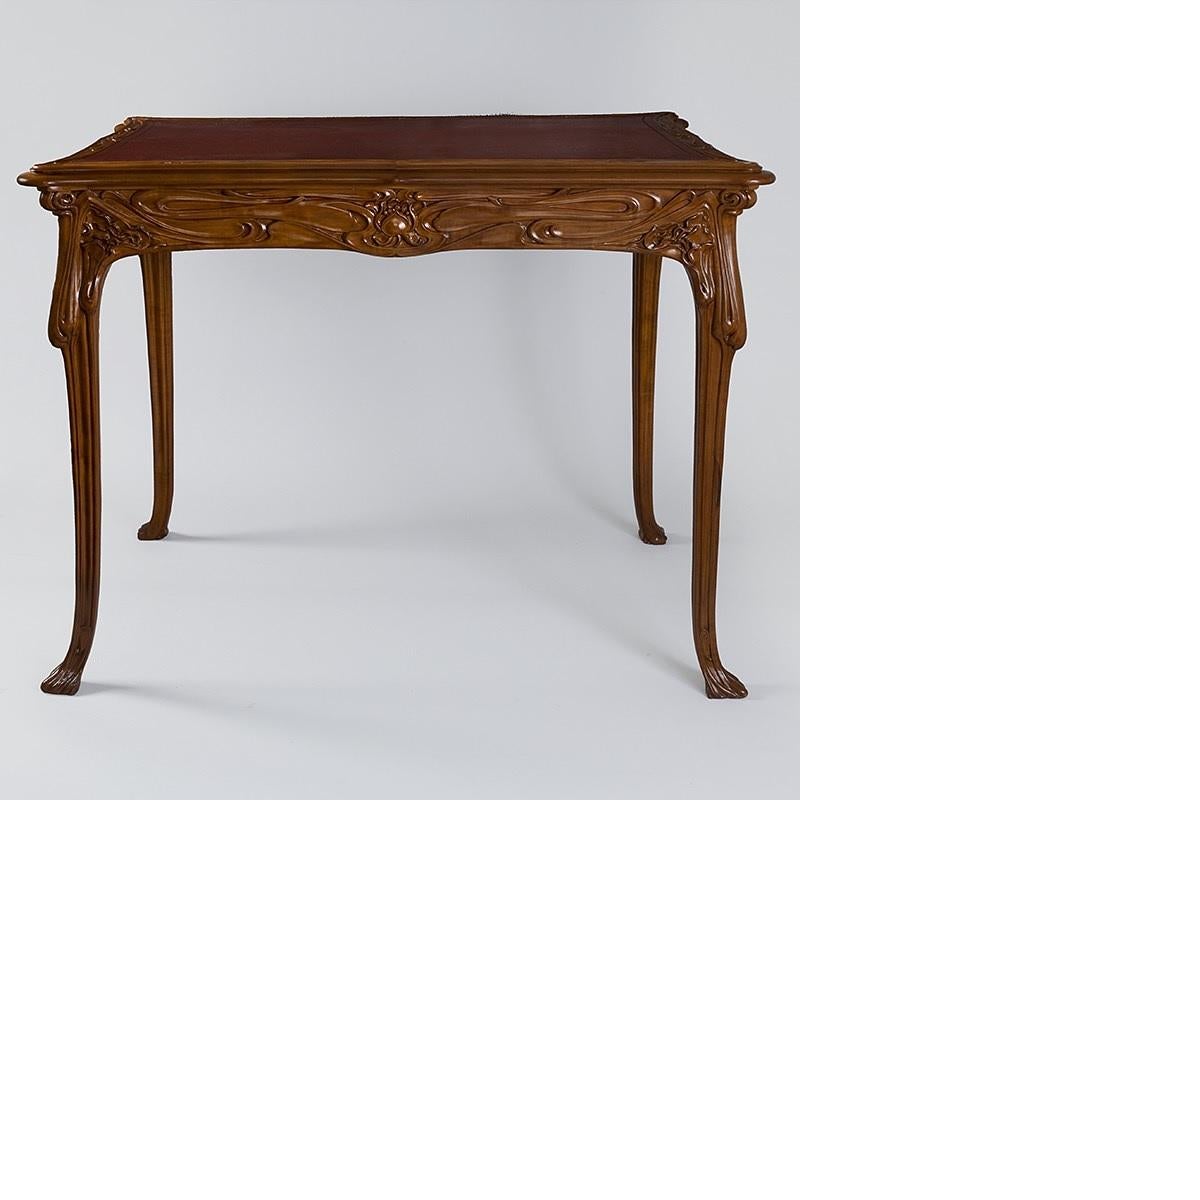 Hand-Carved French Art Nouveau Table Attributed to Edouard Colonna